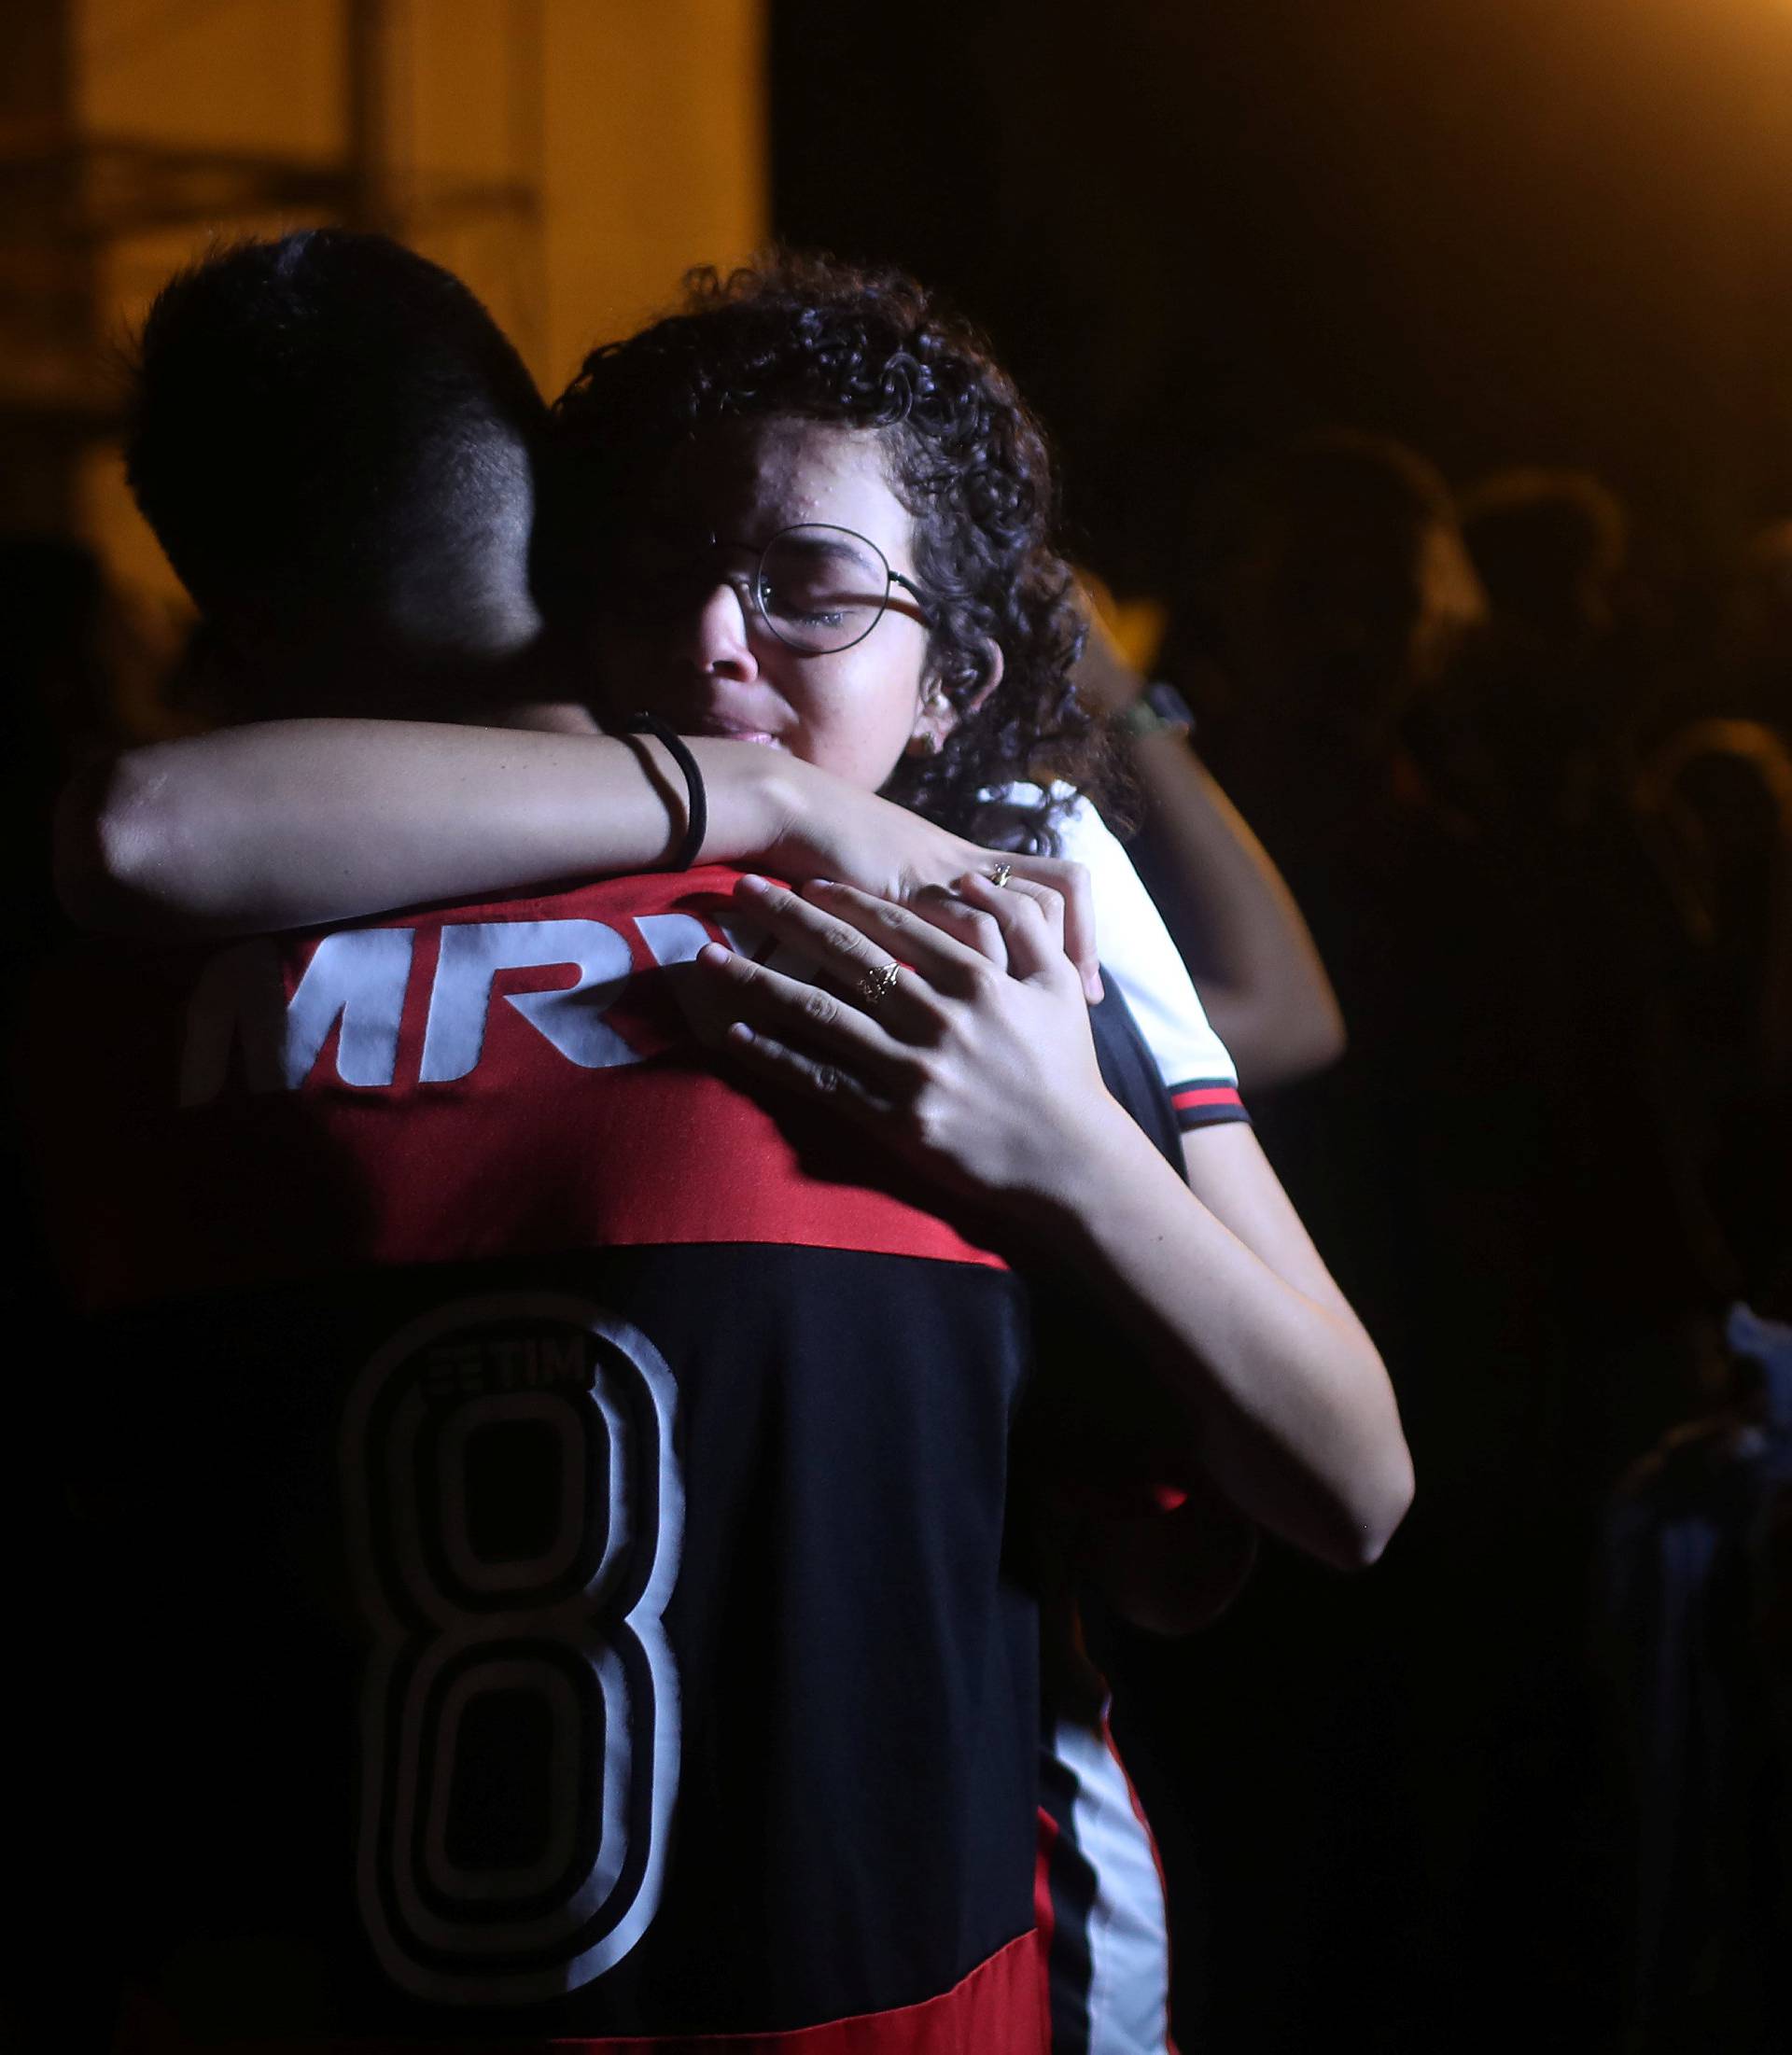 A supporter embraces Flamengo youth soccer player Pereira fter a mass in memory of the victims of the club's training center deadly fire in Rio de Janeiro